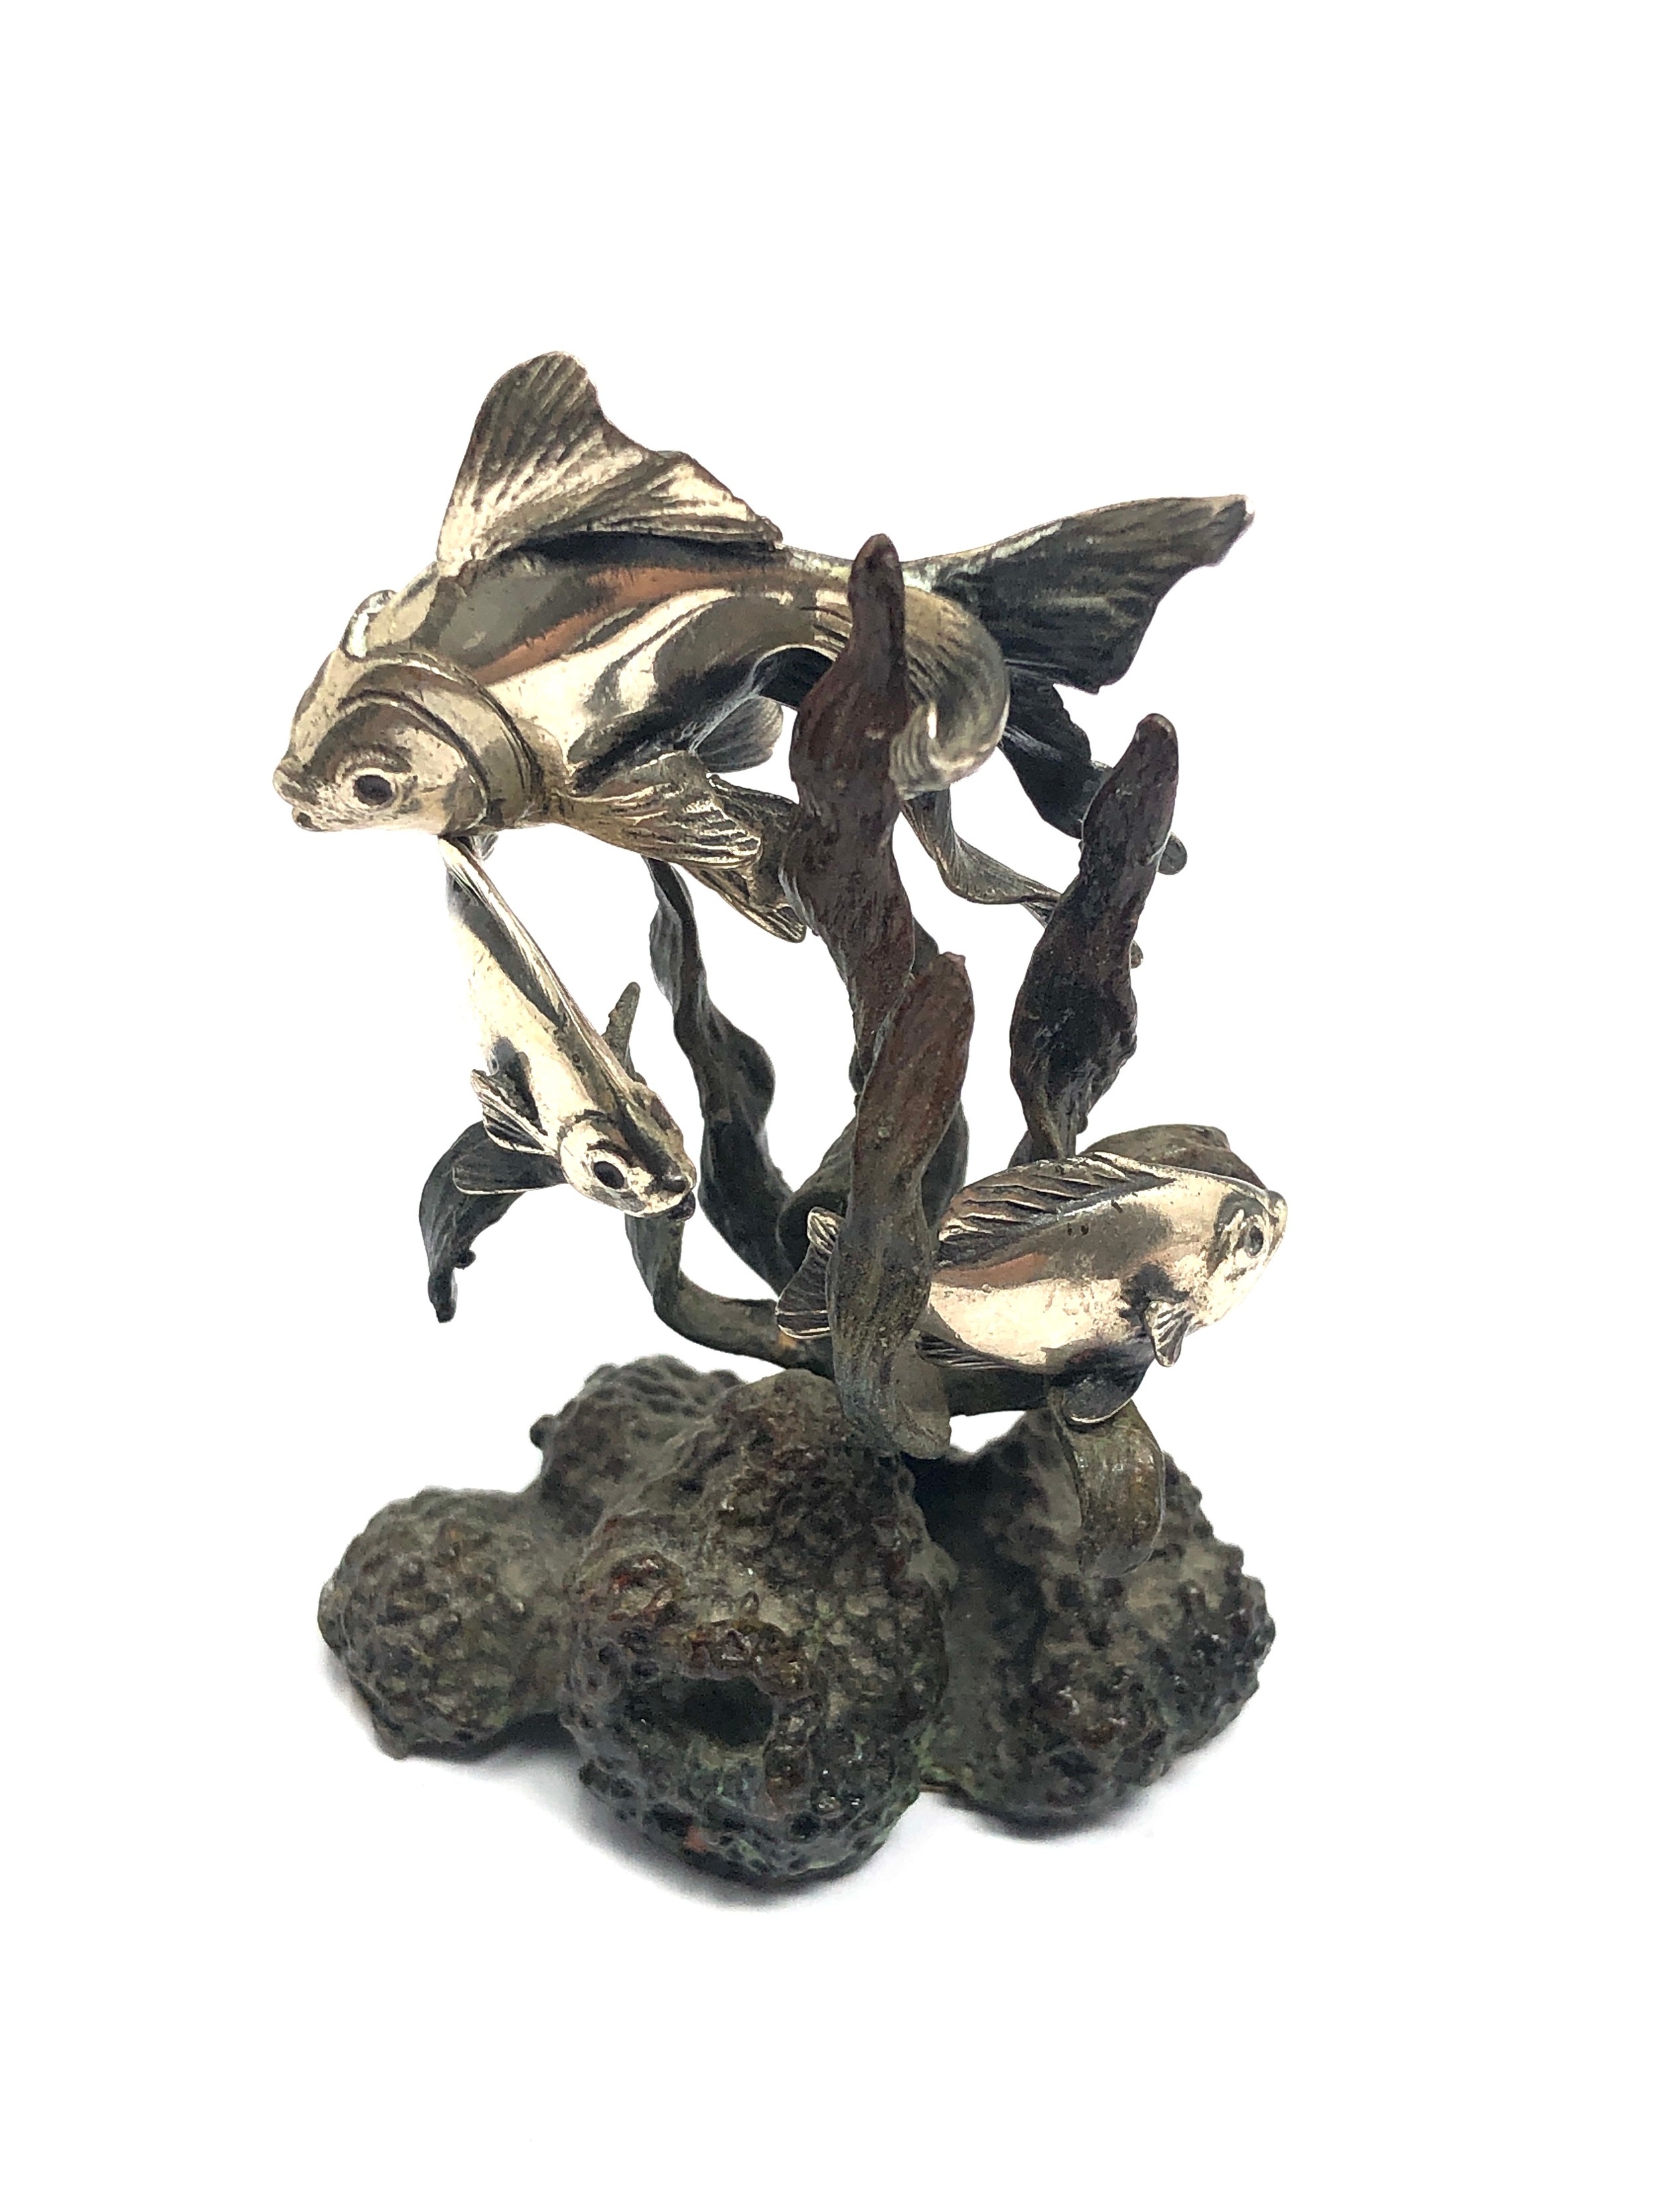 Silver & enamel painted miniature fish figure group measures approx 6.5cm tall hallmarked 800 weight